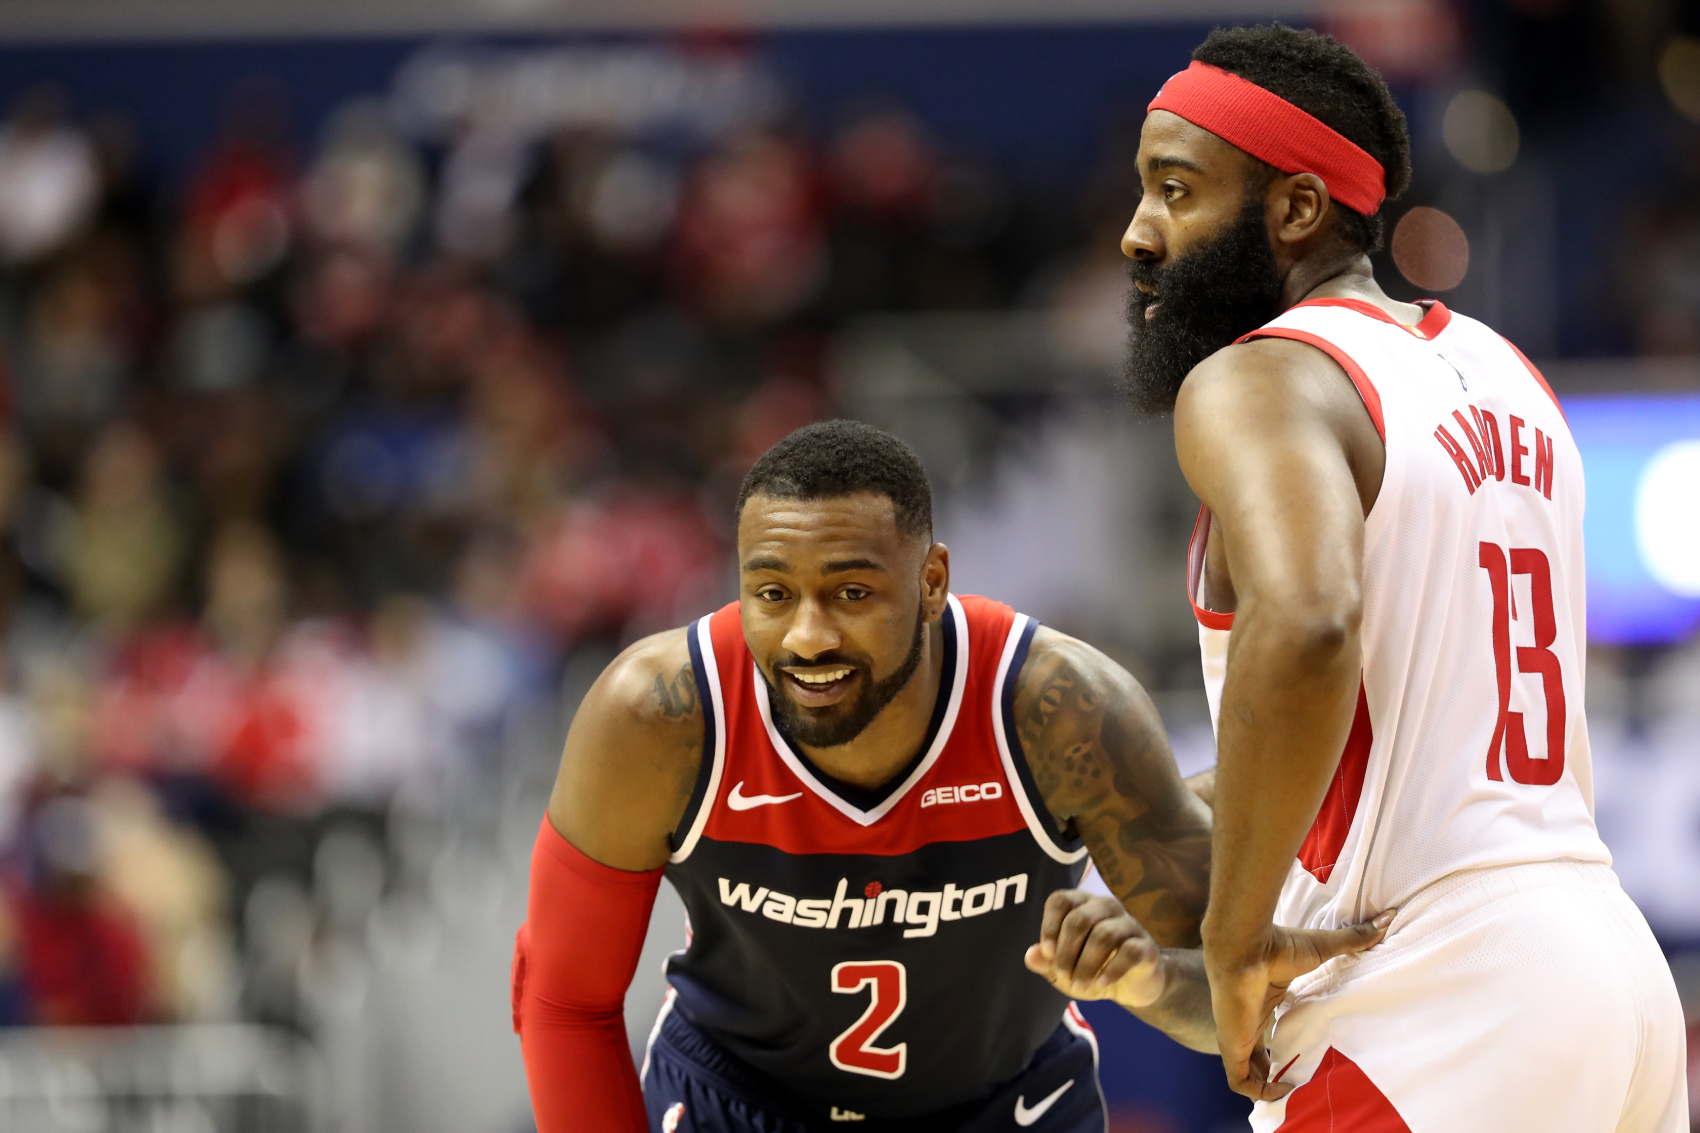 John Wall is new to the Houston Rockets, but he is already sending an encouraging message about James Harden and his future with the team.